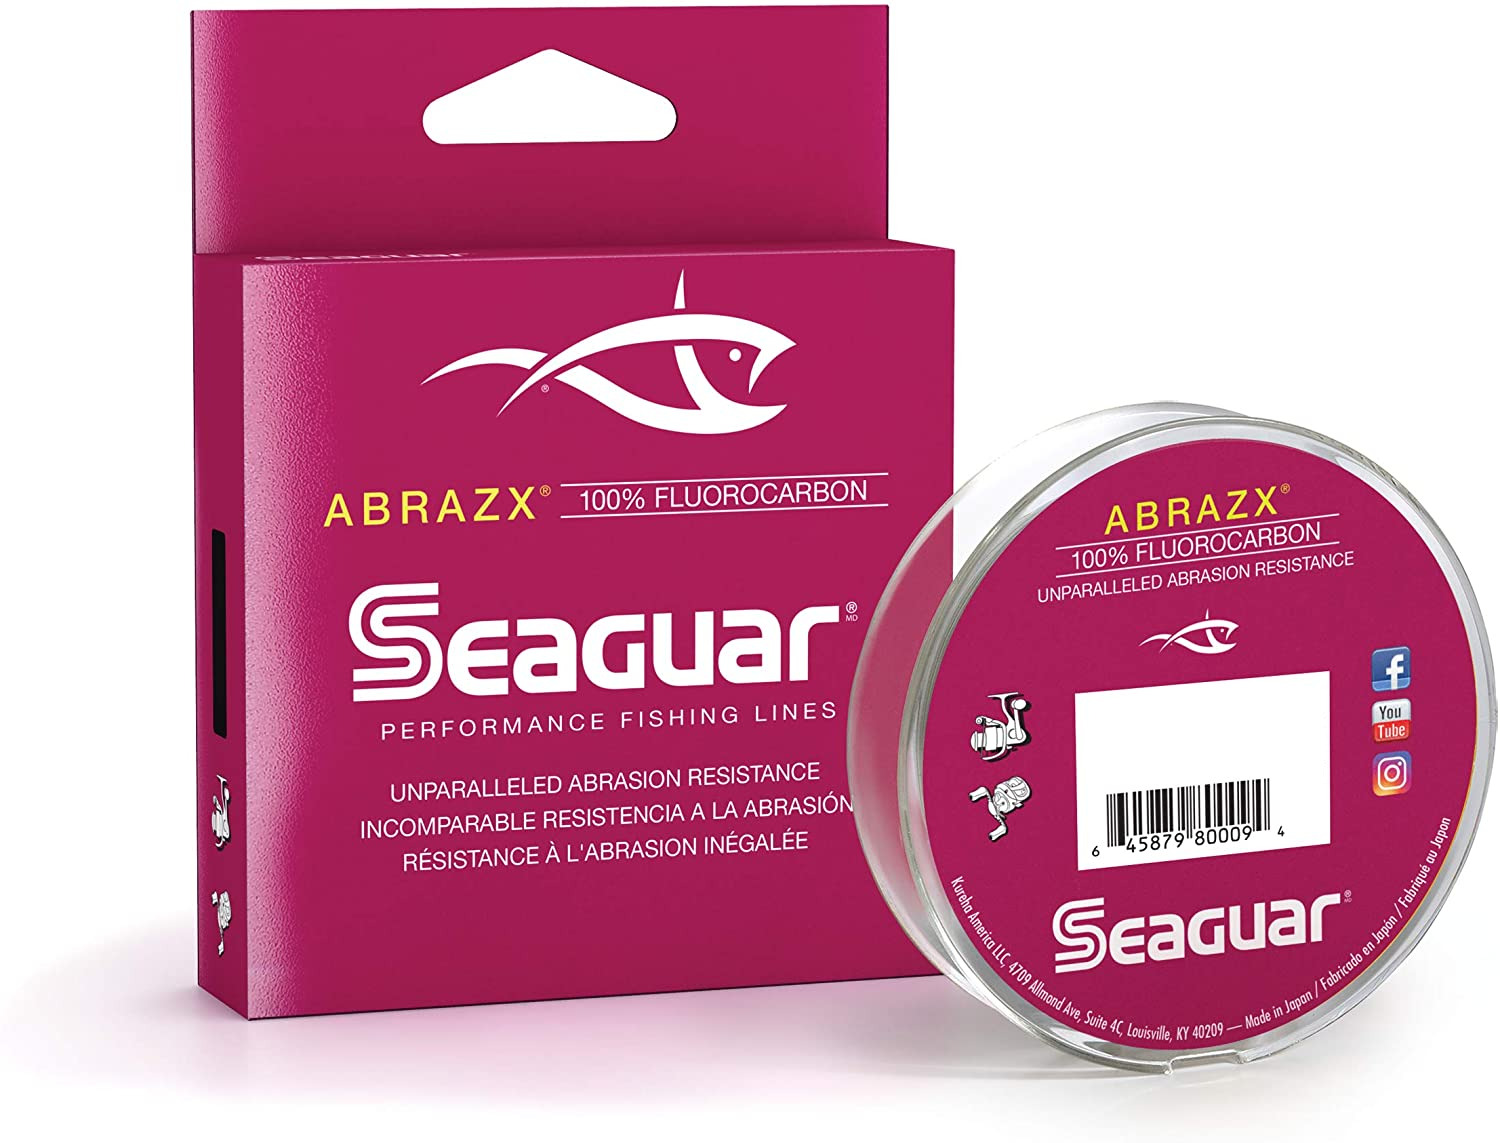 Seaguar AbrazX Fluorocarbon Line - 200 Yard Spool, Choice of Line Size